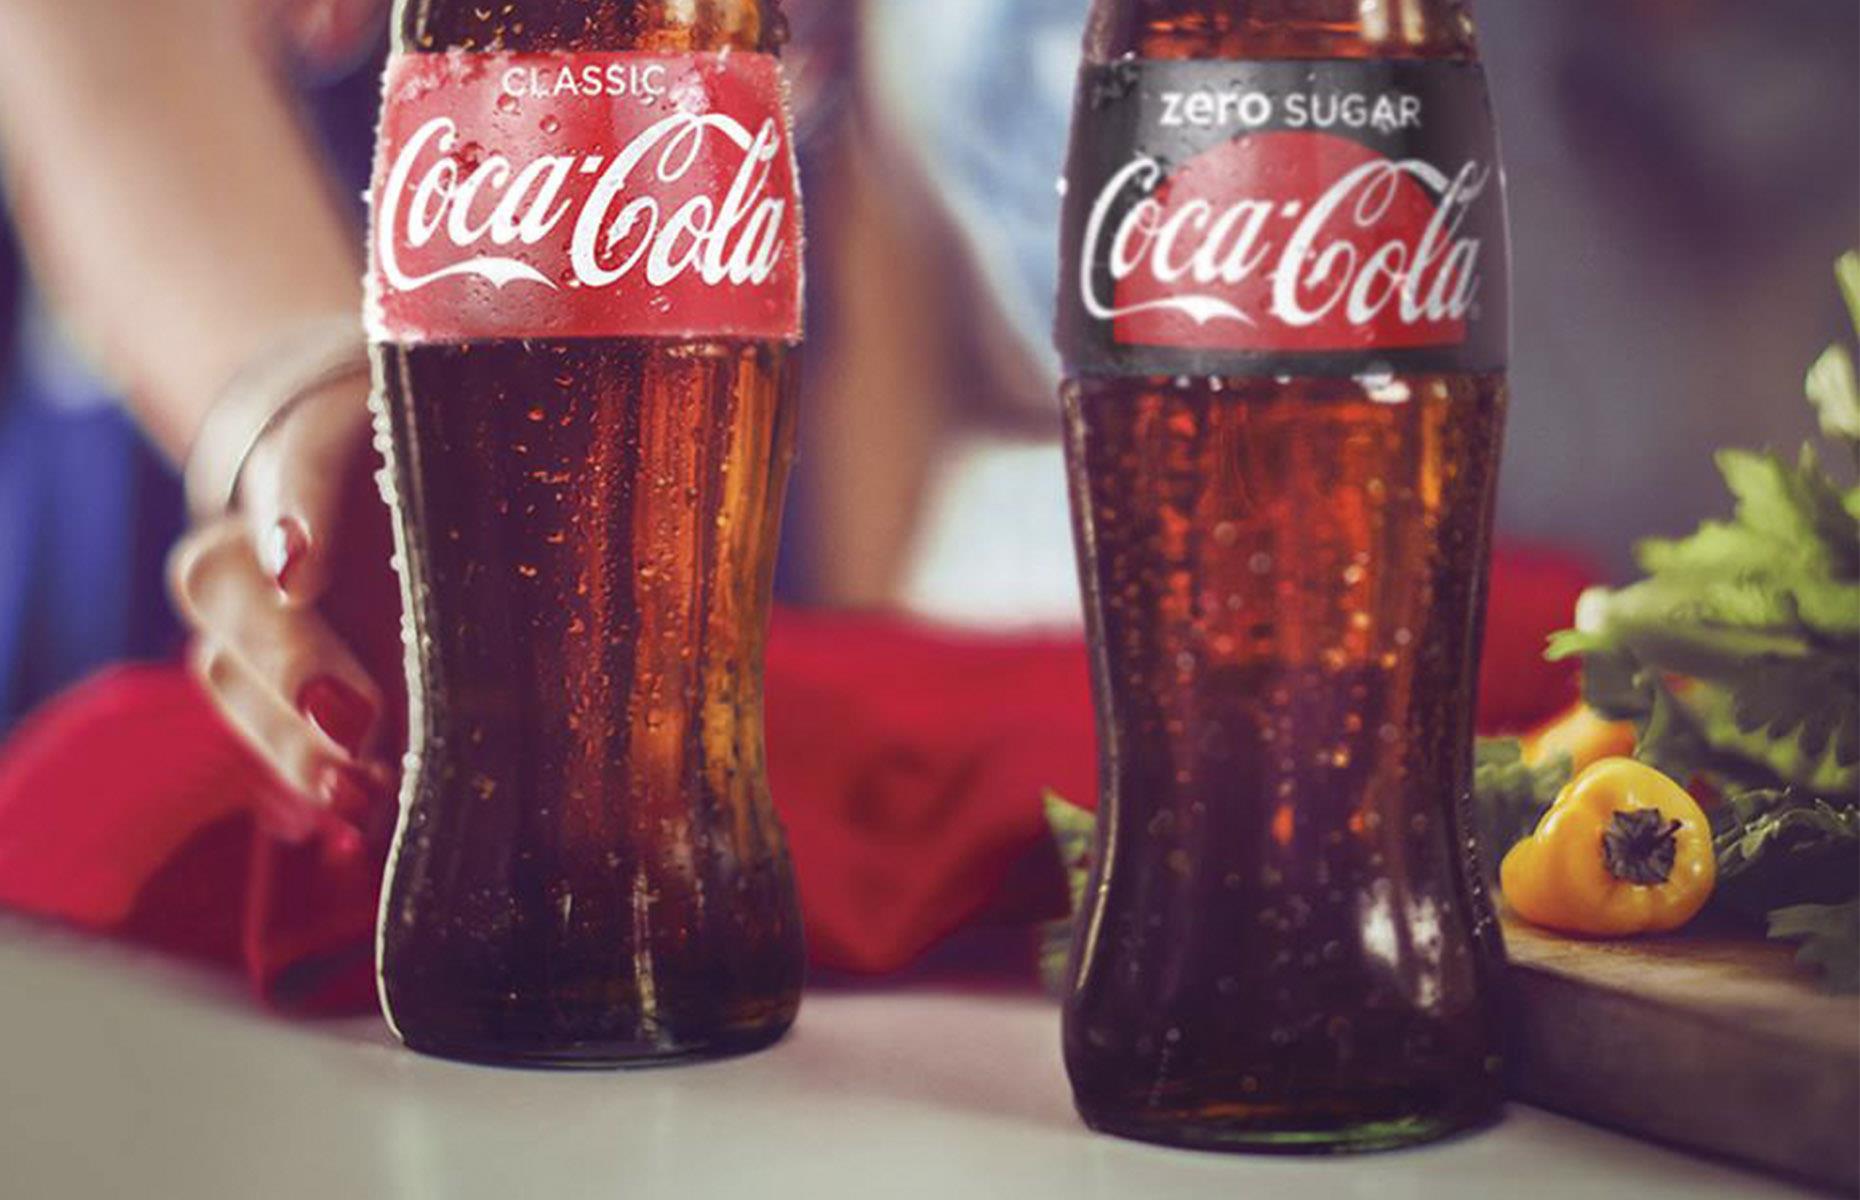 <p>It isn’t hard to see why Coca-Cola is so well-recognized. It's estimated that the average person around the world drinks a Coca-Cola product – whether that's Coke, Sprite or Fanta – every four days. We truly are a globe of soda addicts.</p>  <p><strong><a href="https://www.lovefood.com/gallerylist/64837/the-incredible-story-of-how-mcdonalds-conquered-the-world">Now discover the incredible story of how McDonald's conquered the world</a></strong></p>